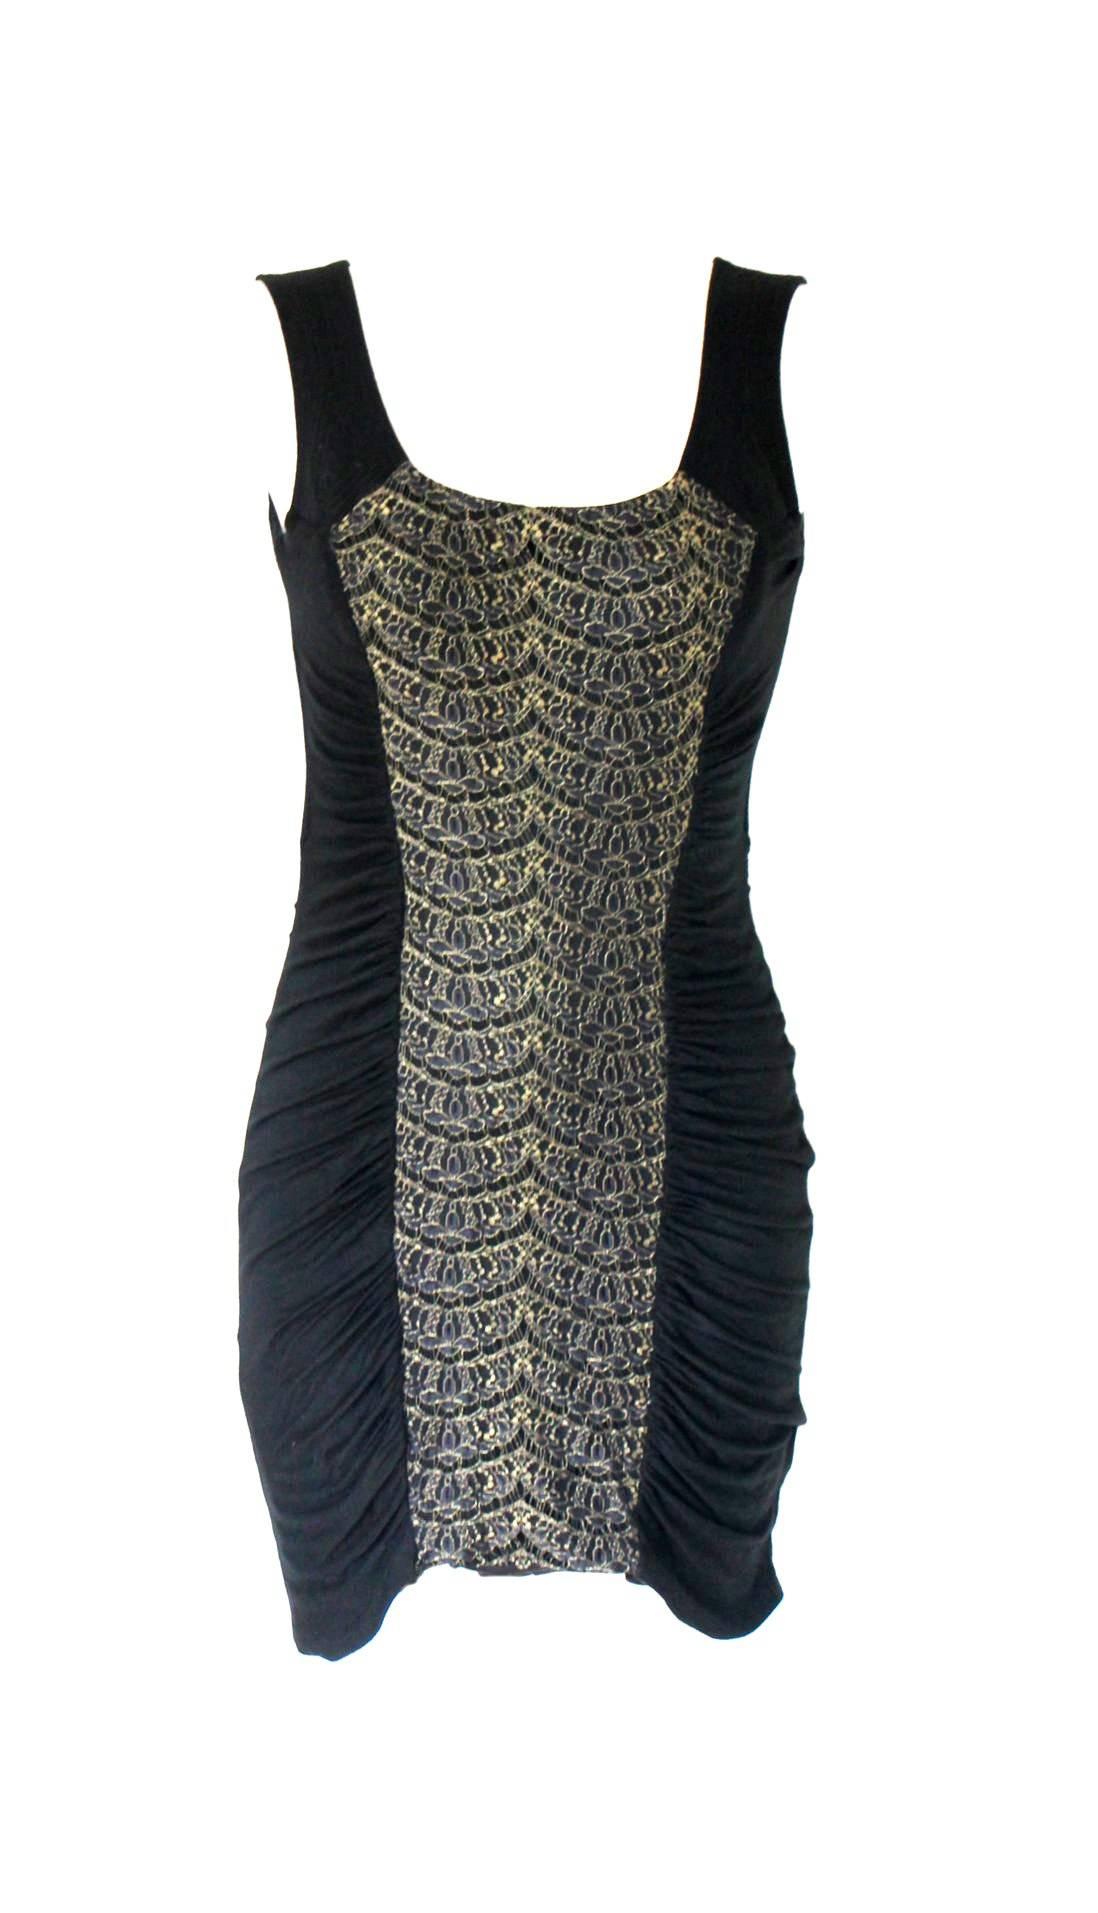 
RARE BLACK BODYCON CUTOUT DRESS WITH GOLDEN LACE

BY GIANNI VERSACE COUTURE

FROM HIS FAMOUS 1990S COLLECTIONS

OWN A PIECE OF FASHION HISTORY - A TRUE GEM
SO HARD TO FIND IN EXCELLENT CONDITION

    Impossible to find!
    From VERSACE 1990s